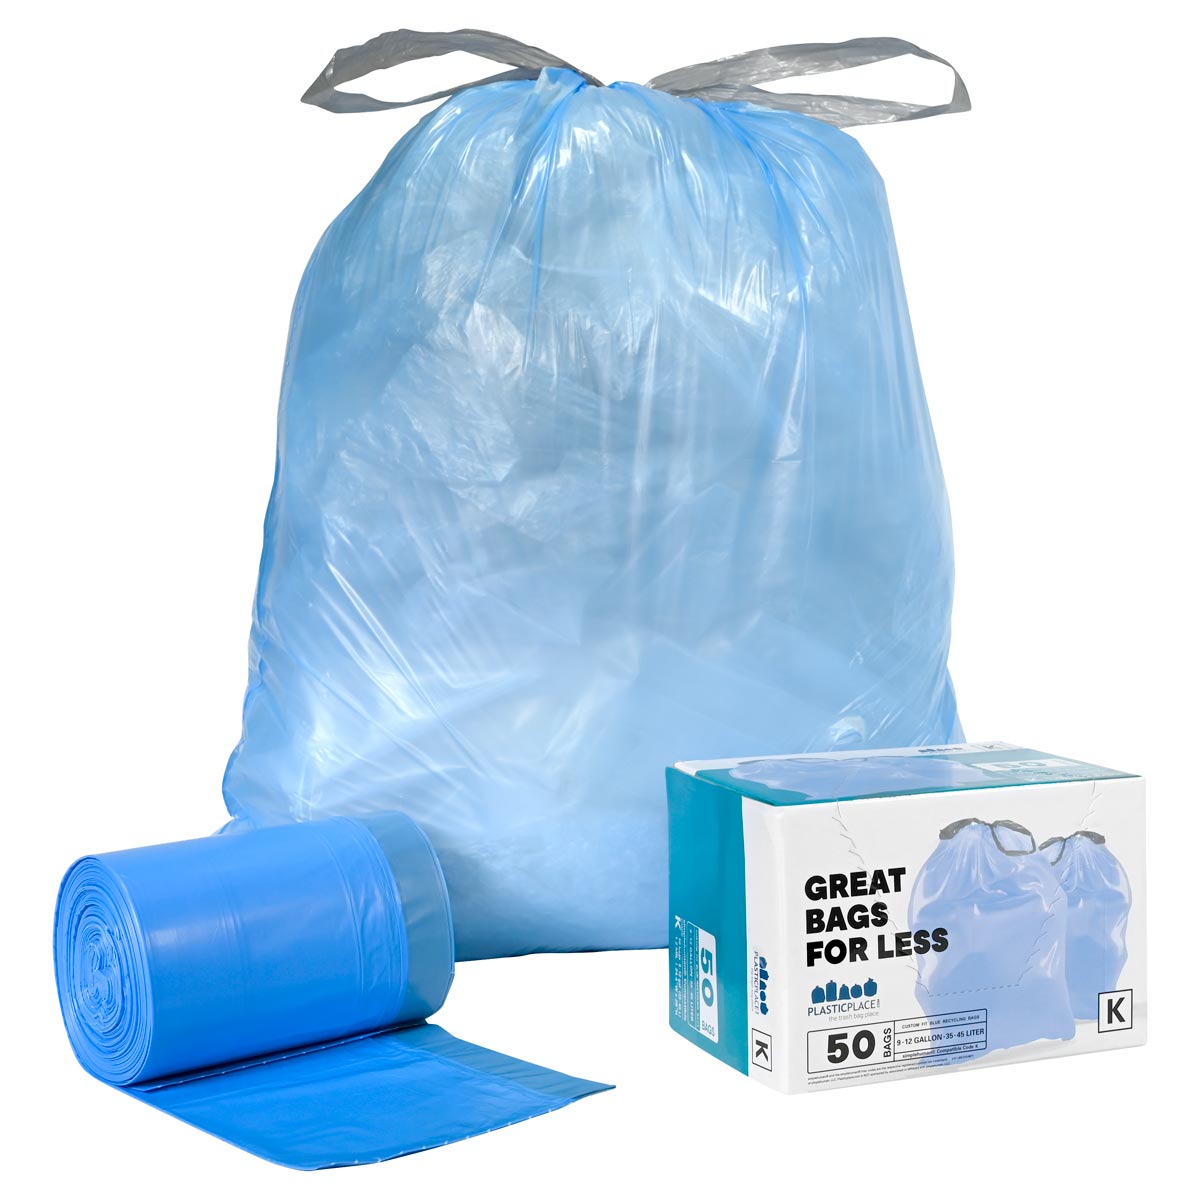 Plasticplace 32-33 Gallon Recycling Bags - Blue, Case of 100